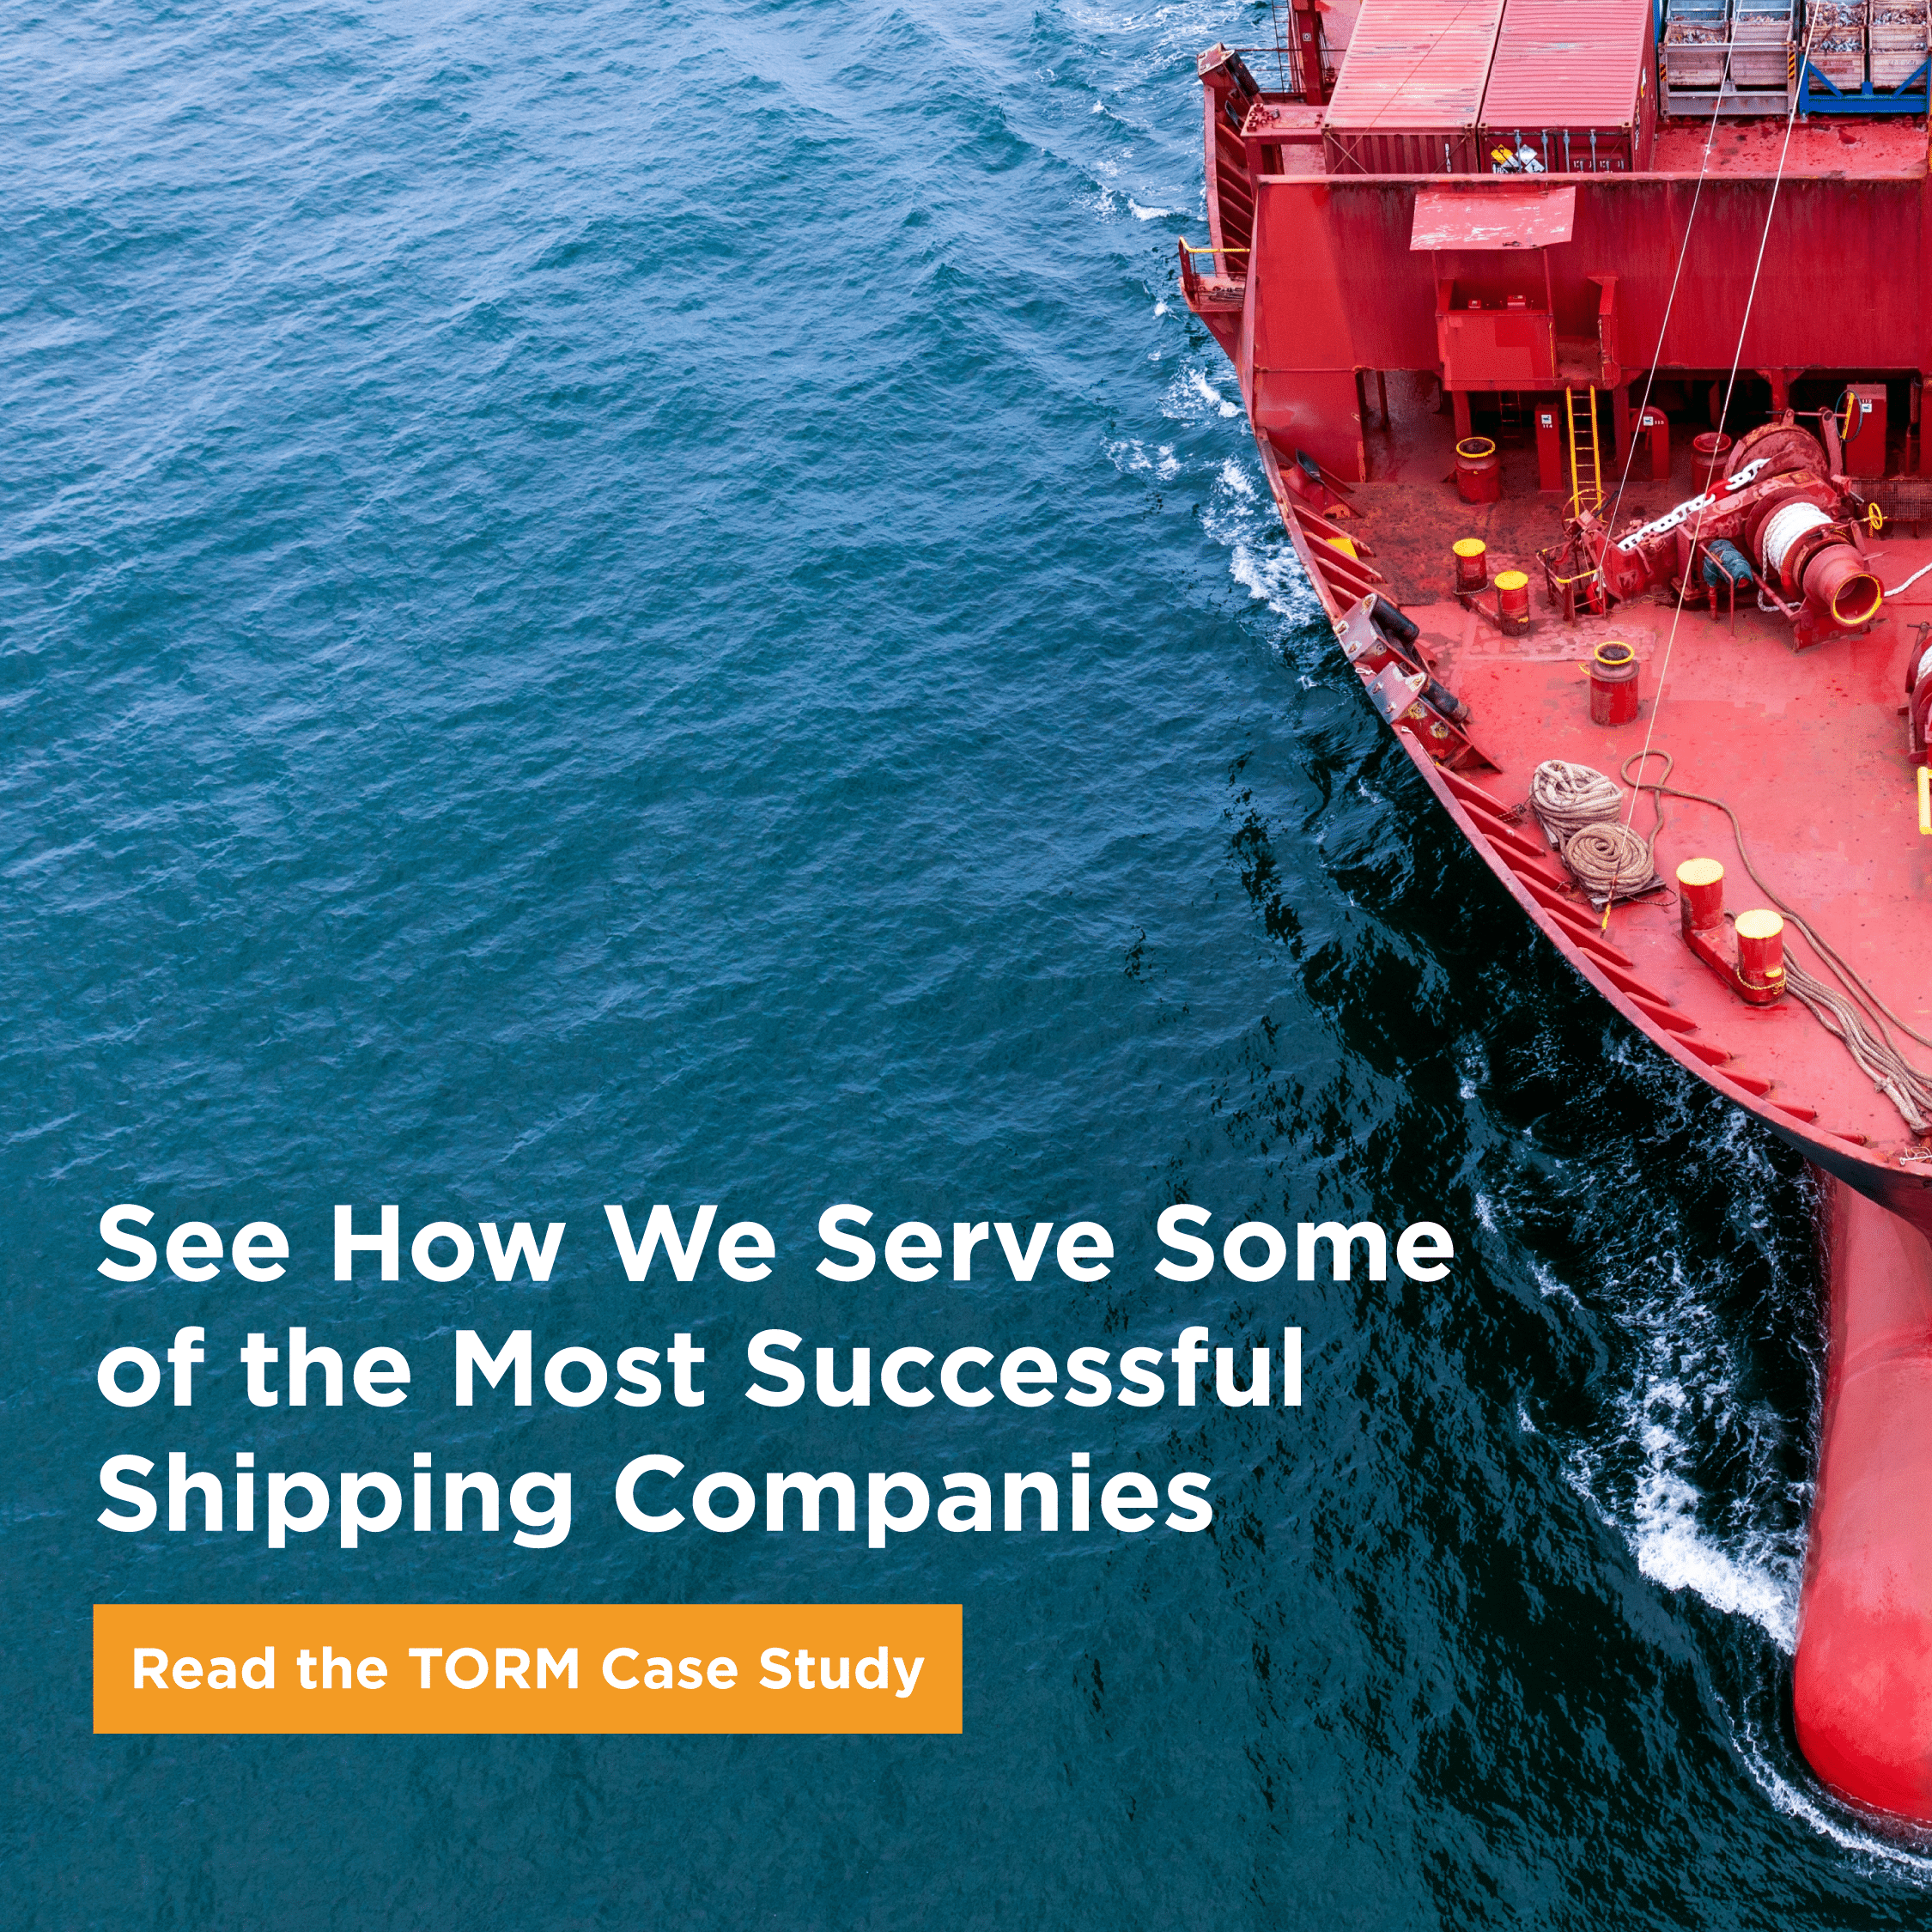 See how we serve some of the most successful shipping companies by reading our TORM case study